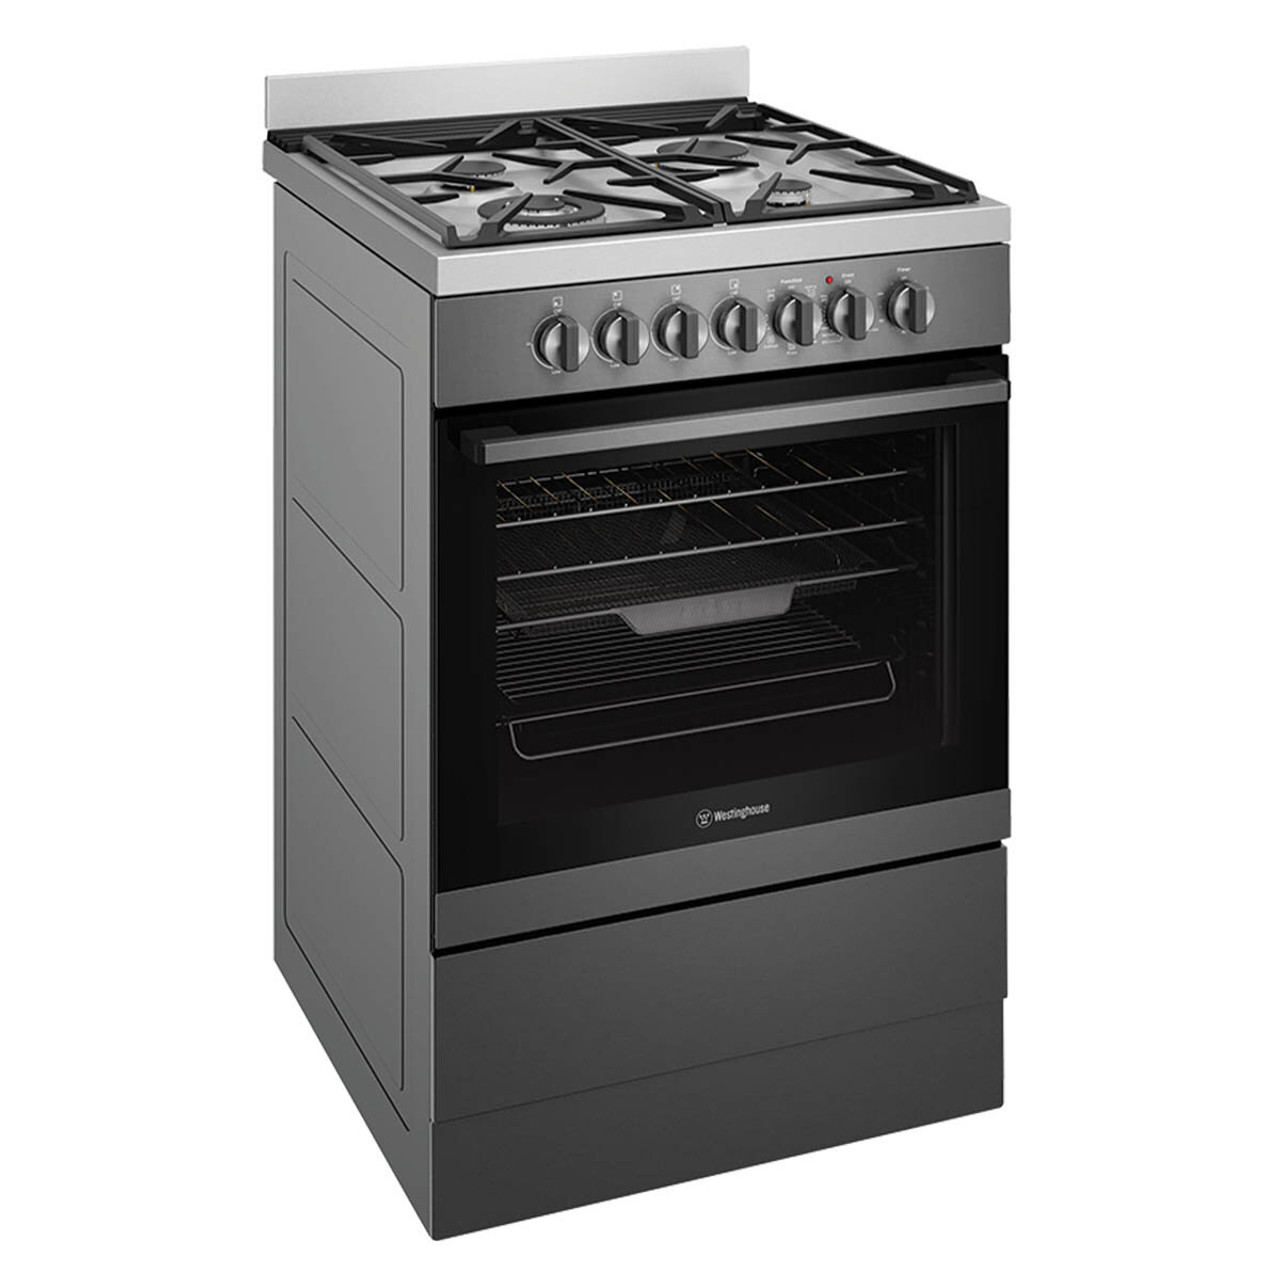 WFE616DSC - 60cm Freestanding Cooker with AirFry and Wok Burner - Dark Stainless Steel